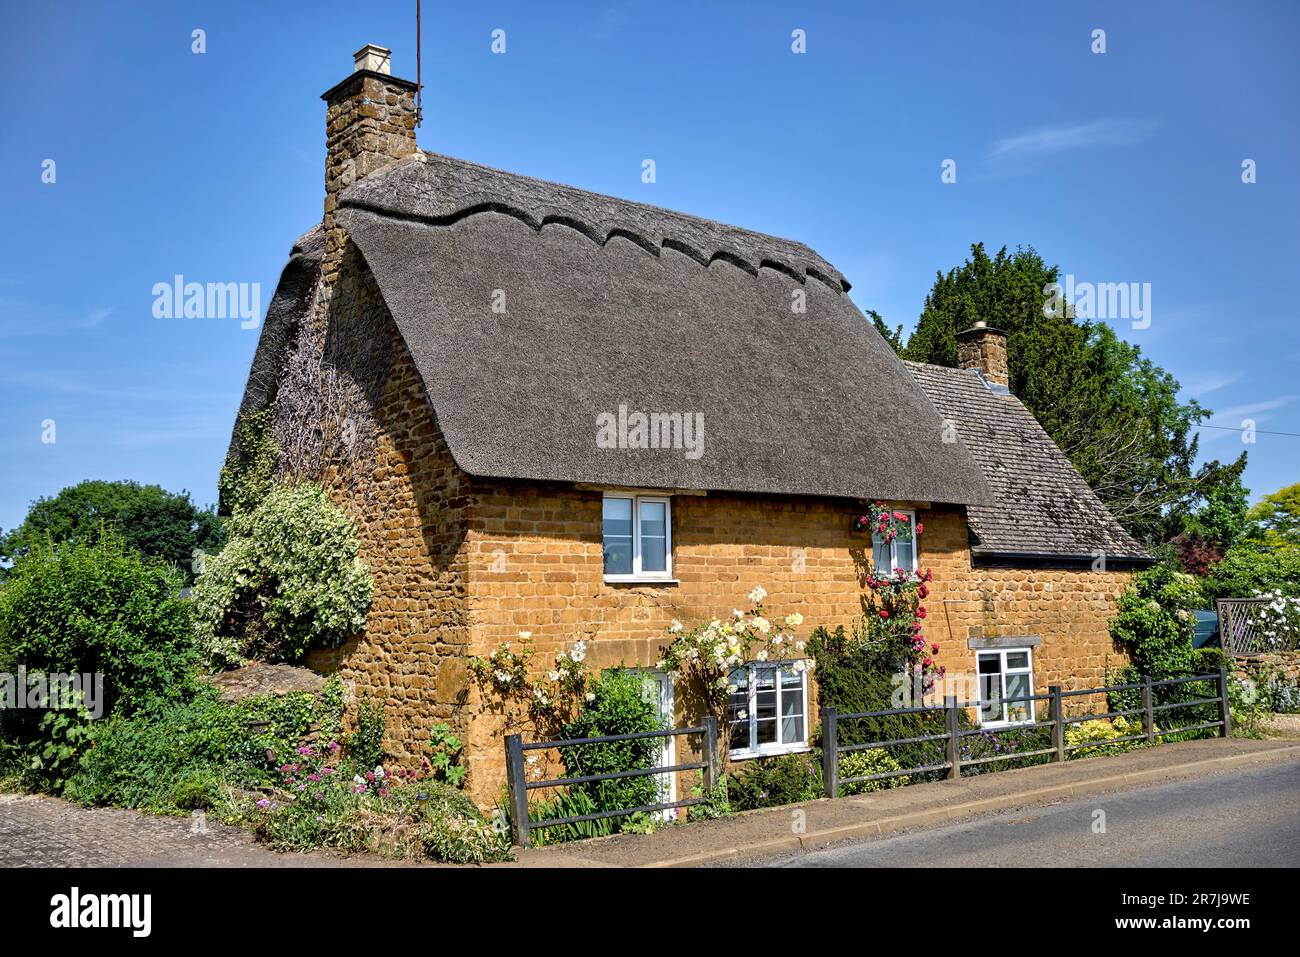 Thatched Cottage UK.Picturesque traditional thatched cottage exterior in an English rural setting. Wroxton St Mary Banbury Oxfordshire England Stock Photo